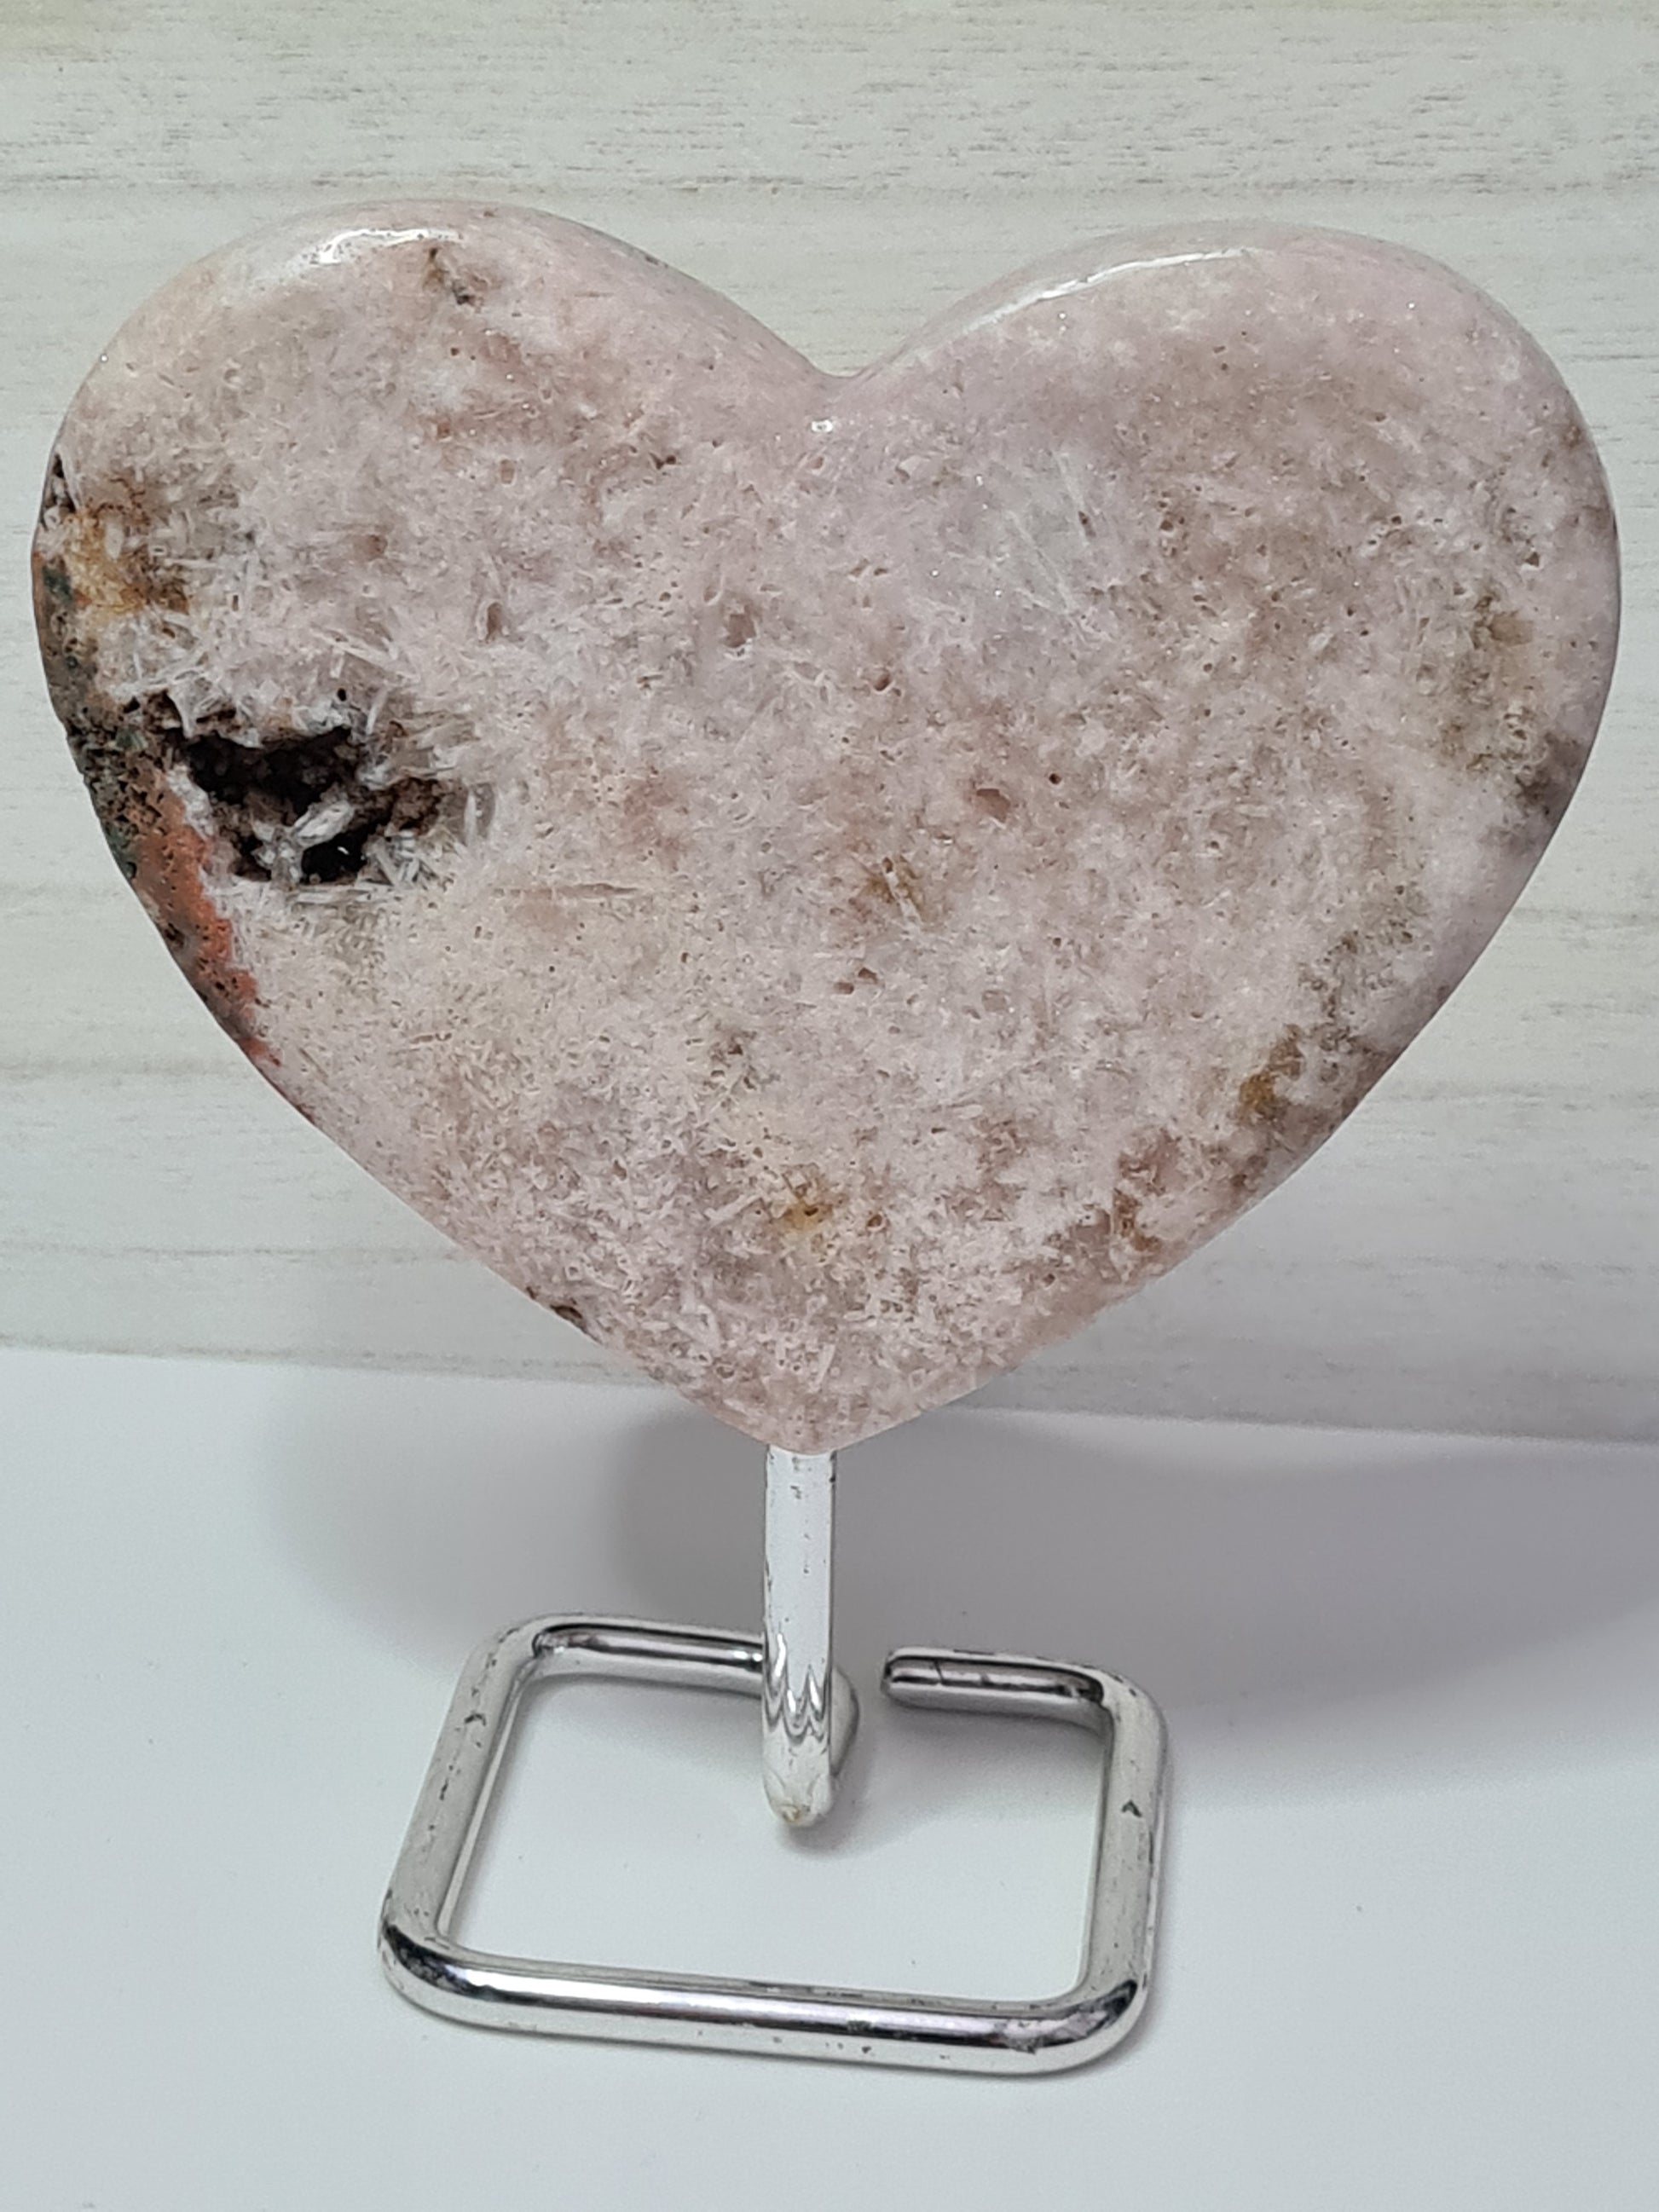 Natural Pink Amethyst Heart with needle like structure, natural caves on silver coloured stand.